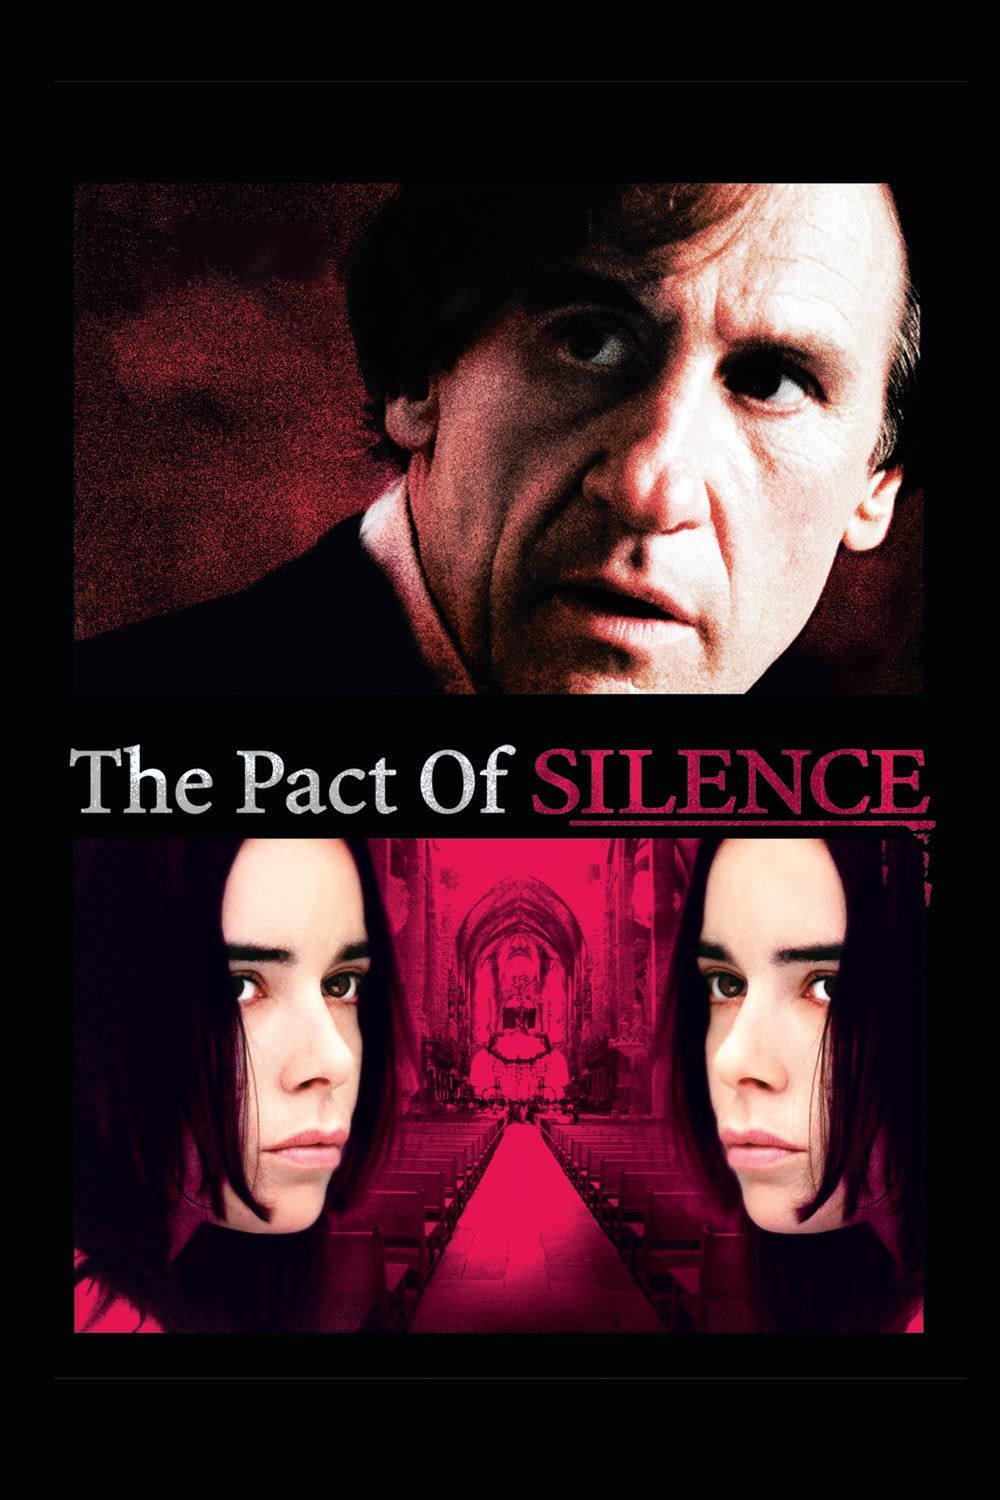 Watch The Pact of Silence Online